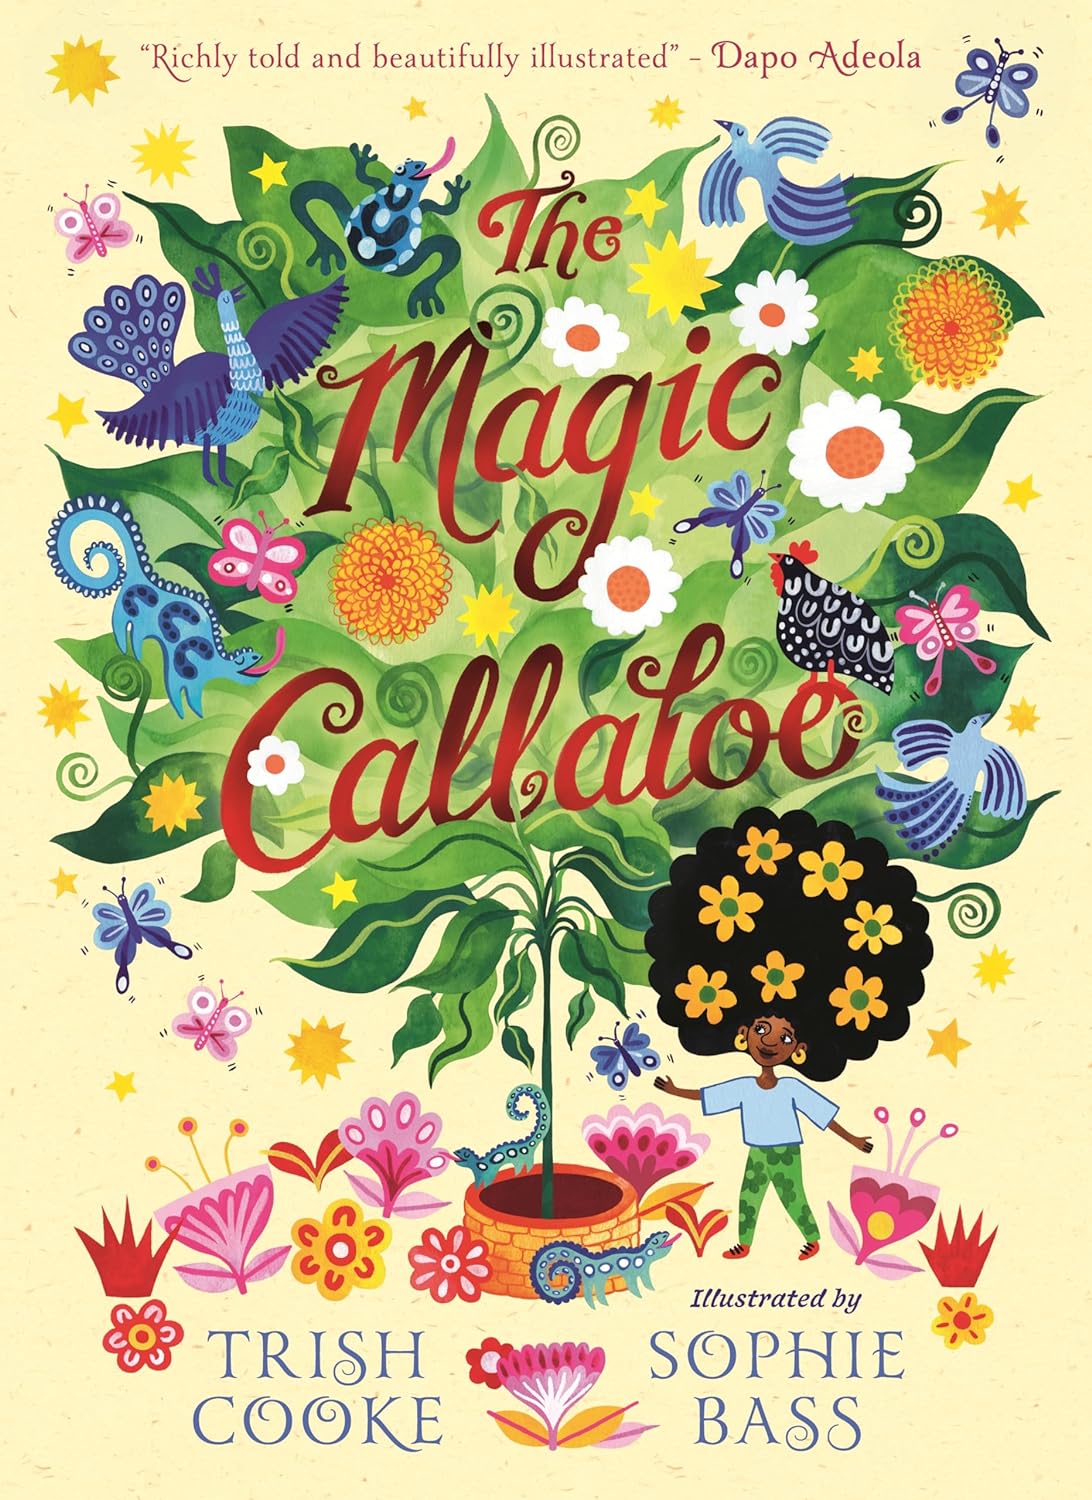 Trish Cooke: The Magic Callaloo, illustrated by Sophie Bass